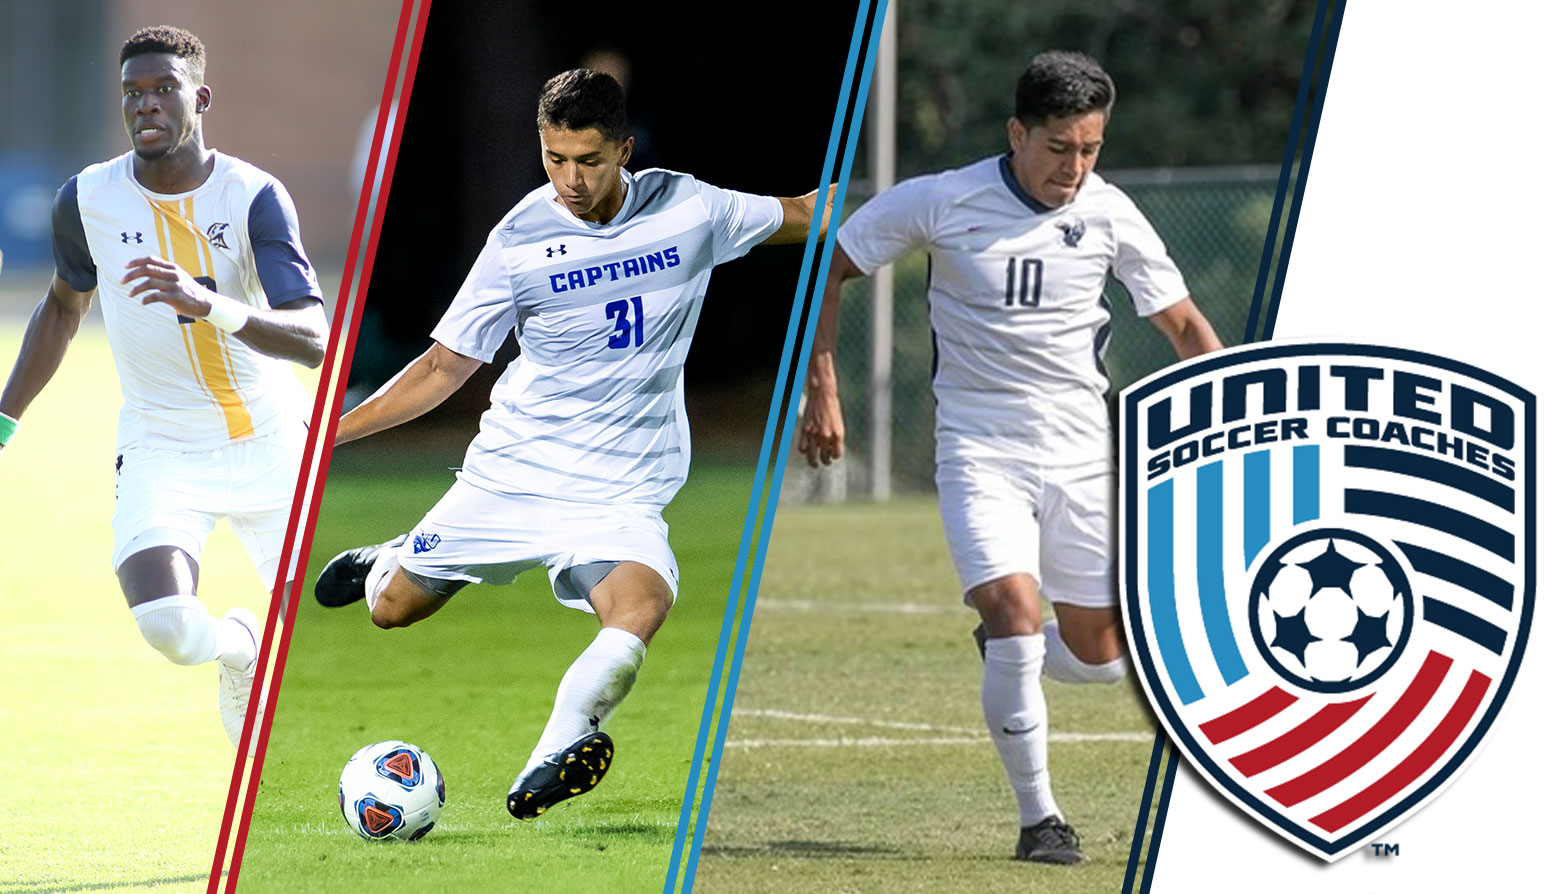 Trio of CAC Men's Soccer Standouts Collect United Soccer Coaches All-America Honors